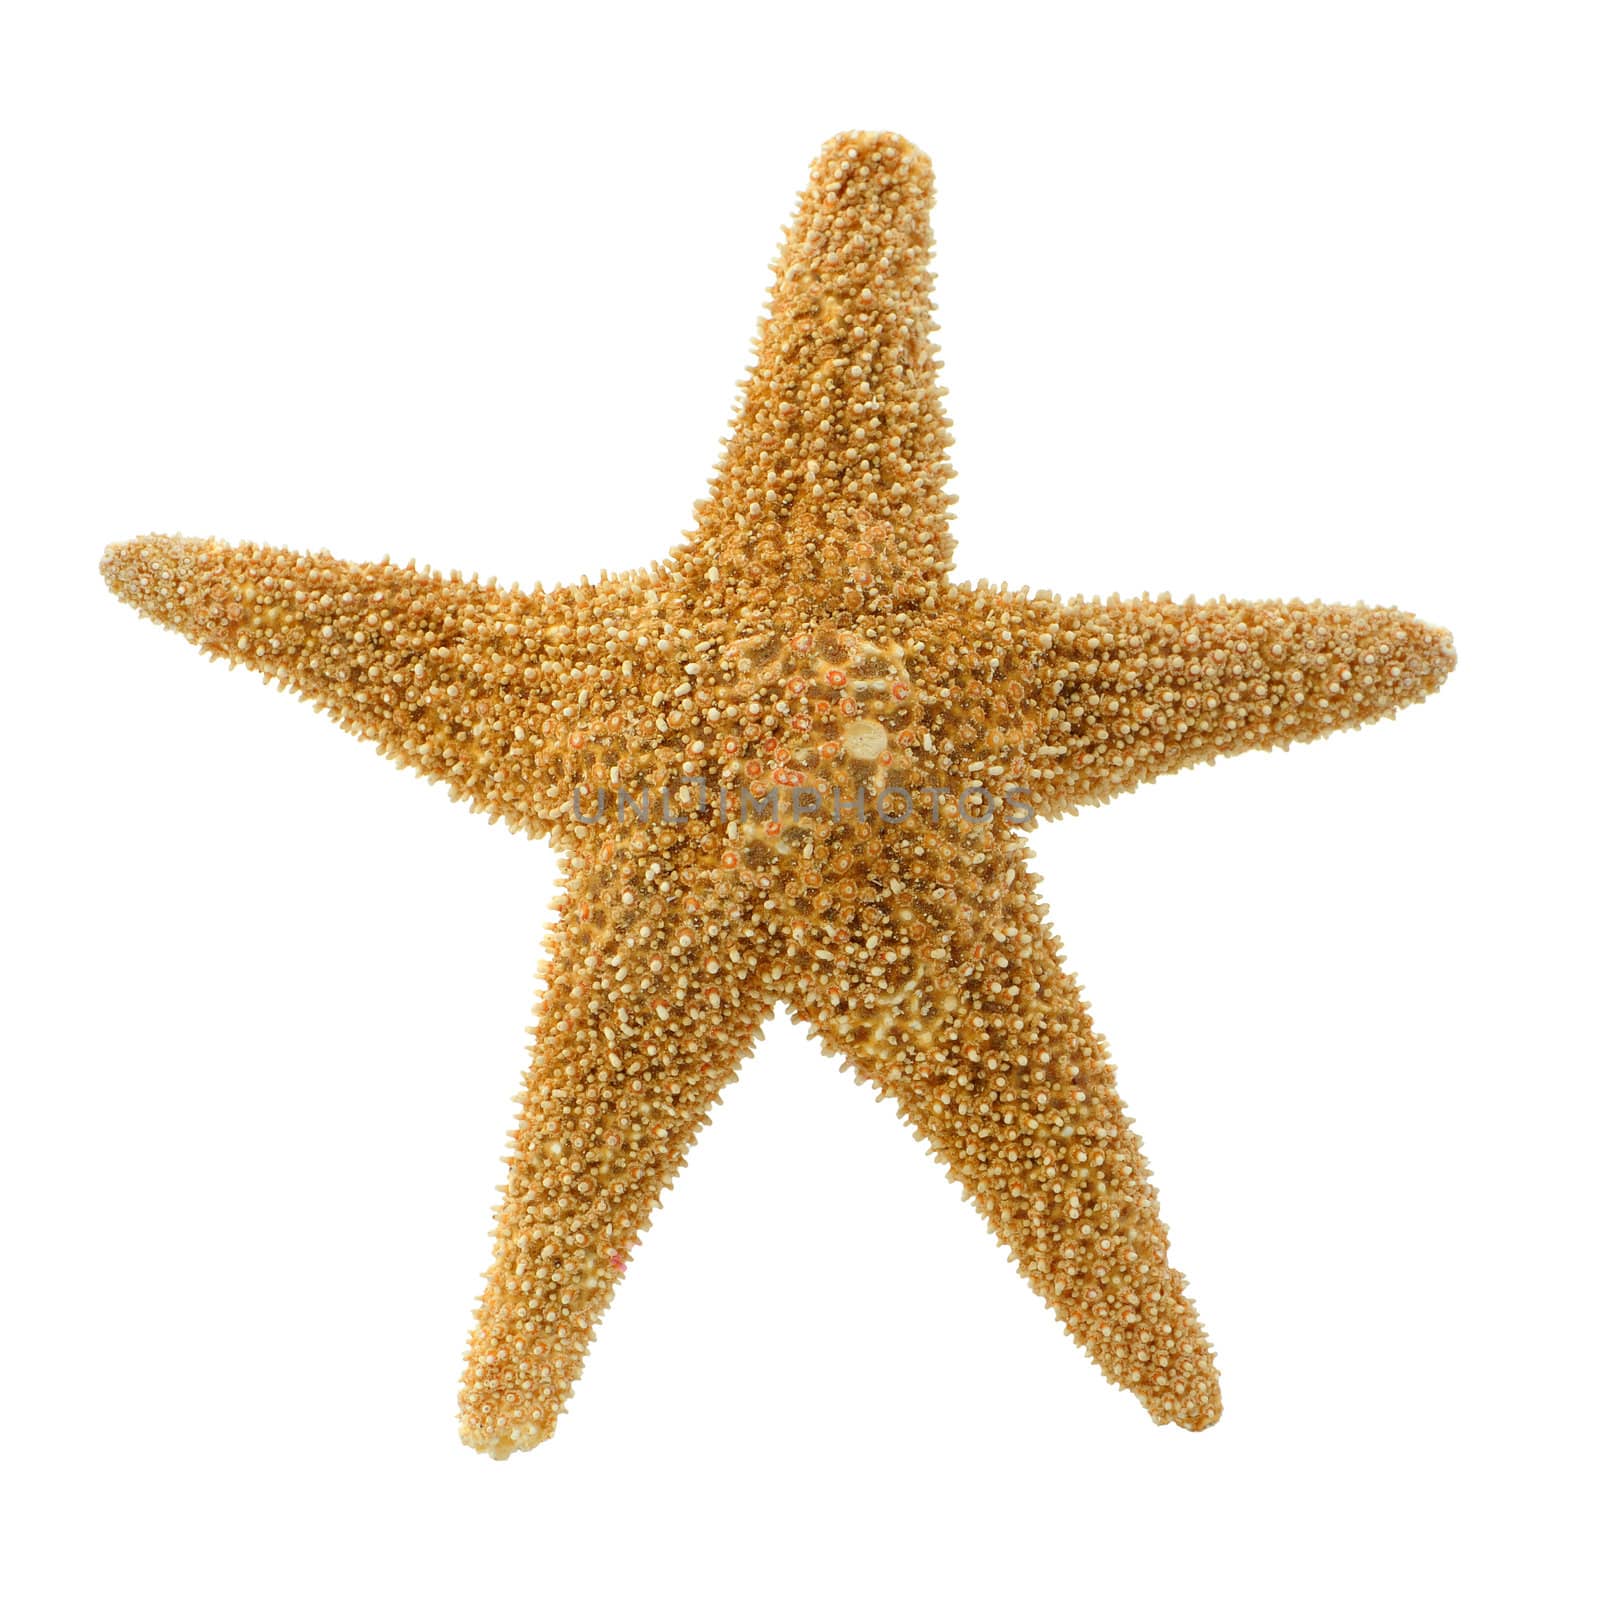 Starfish. It is isolated on a white background. A photo close up